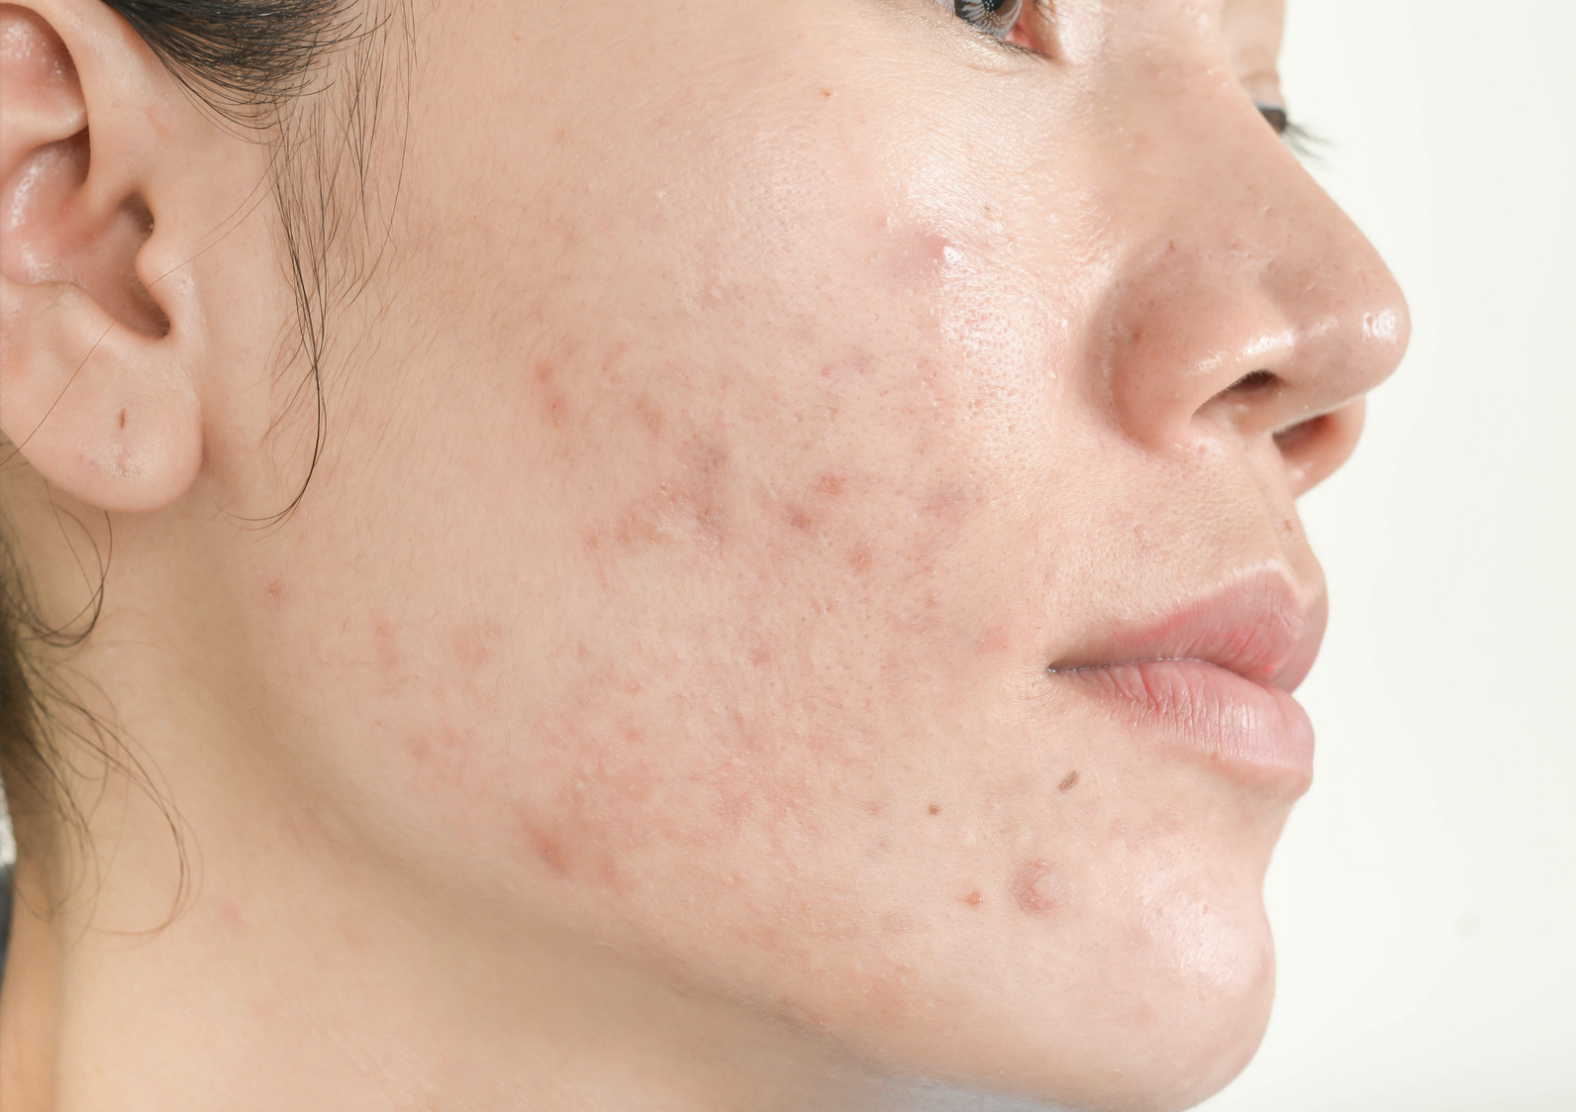 When Should You Seek the Help of a Professional for Your Acne?